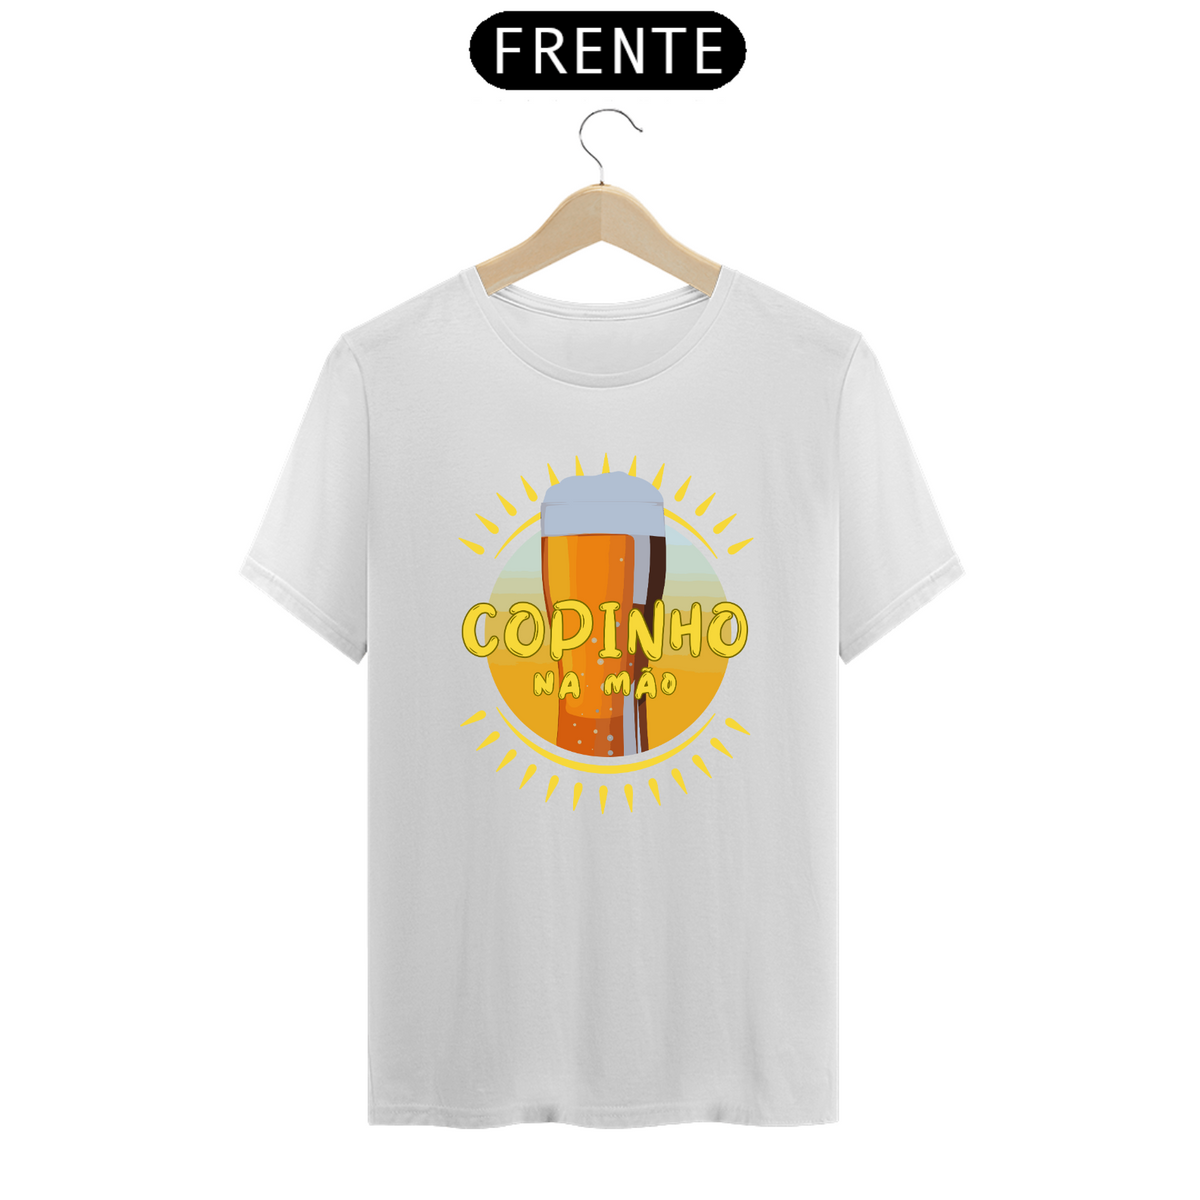 Nome do produto: T-SHIRT CLASSIC - RELAX, BE COOL